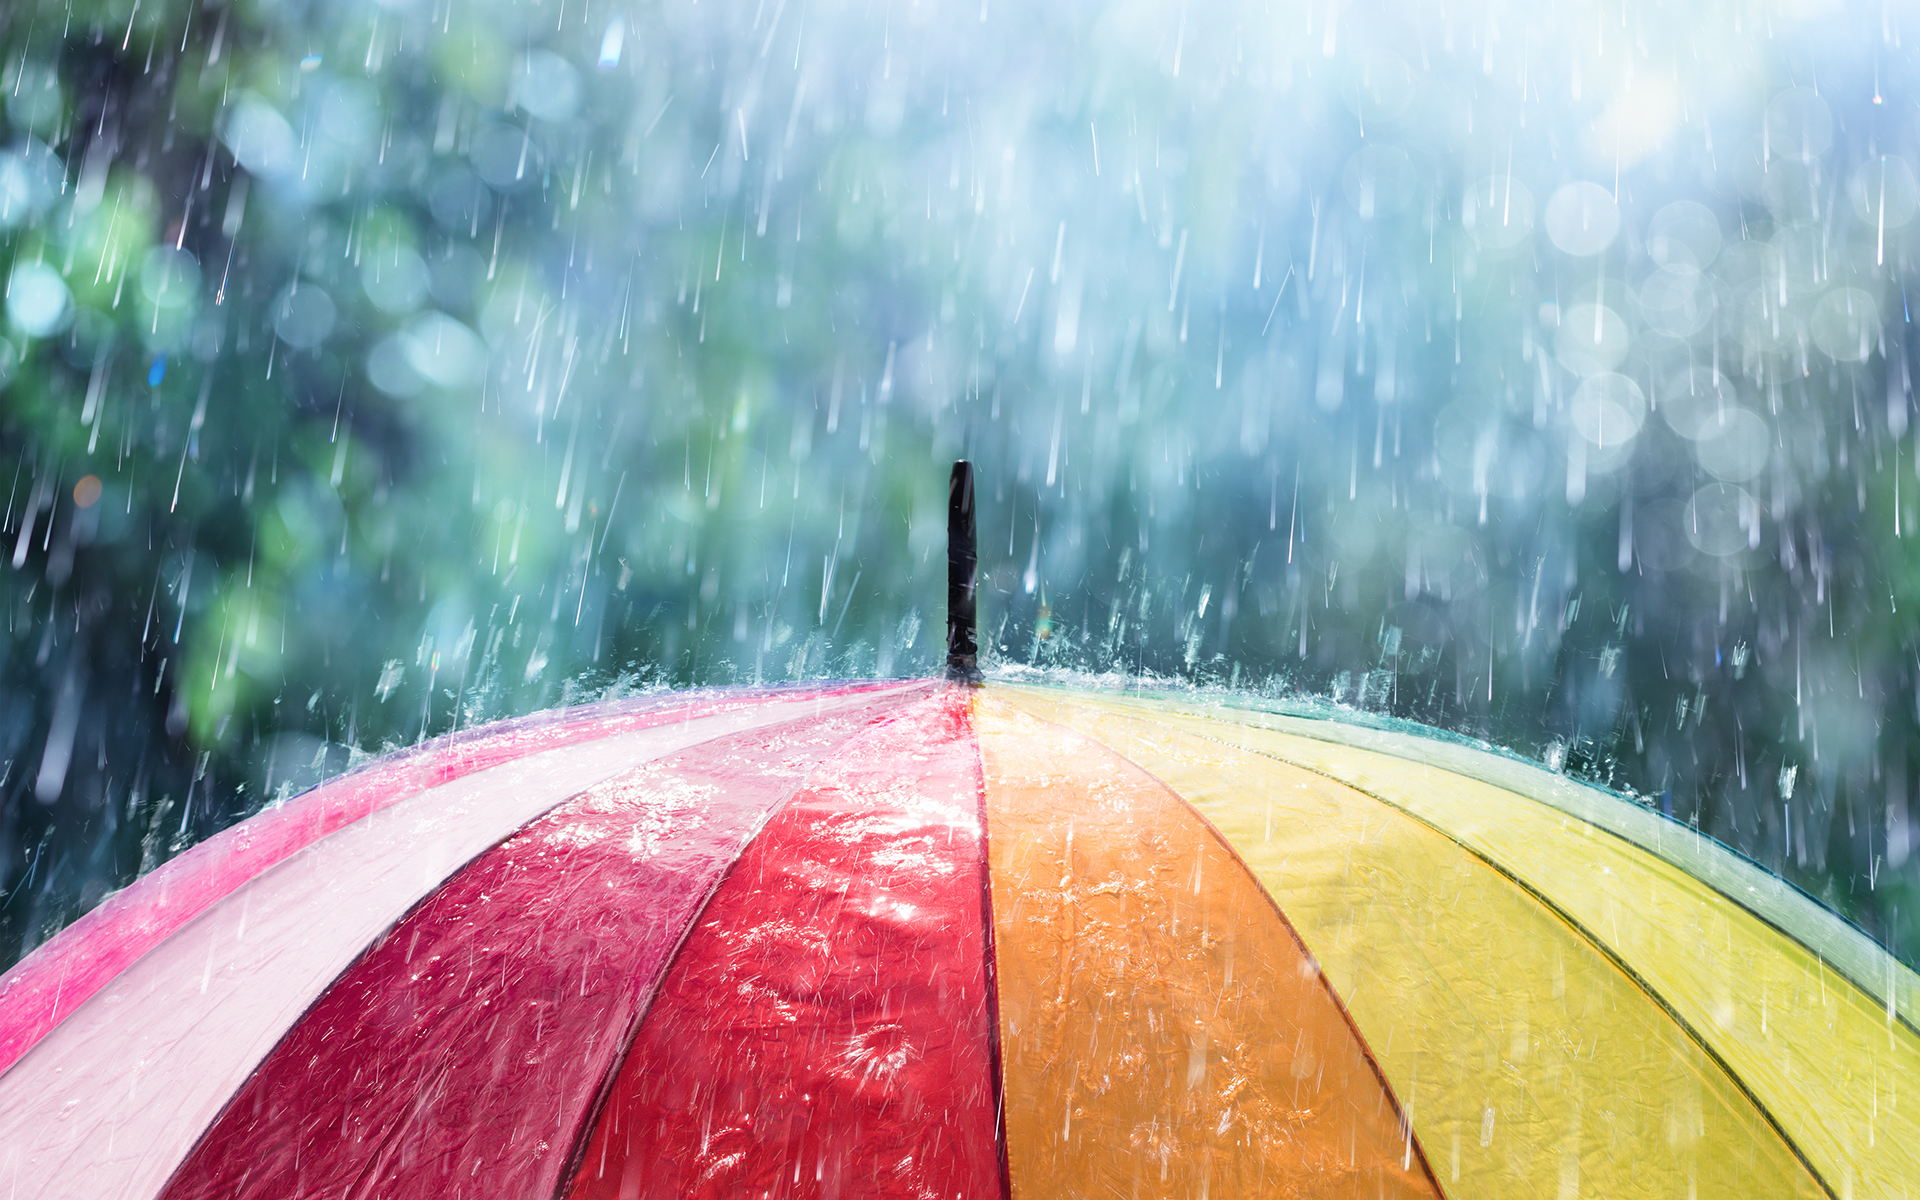 A Guided RAIN Meditation to Cultivate Compassion - Image of rain falling on an umbrella